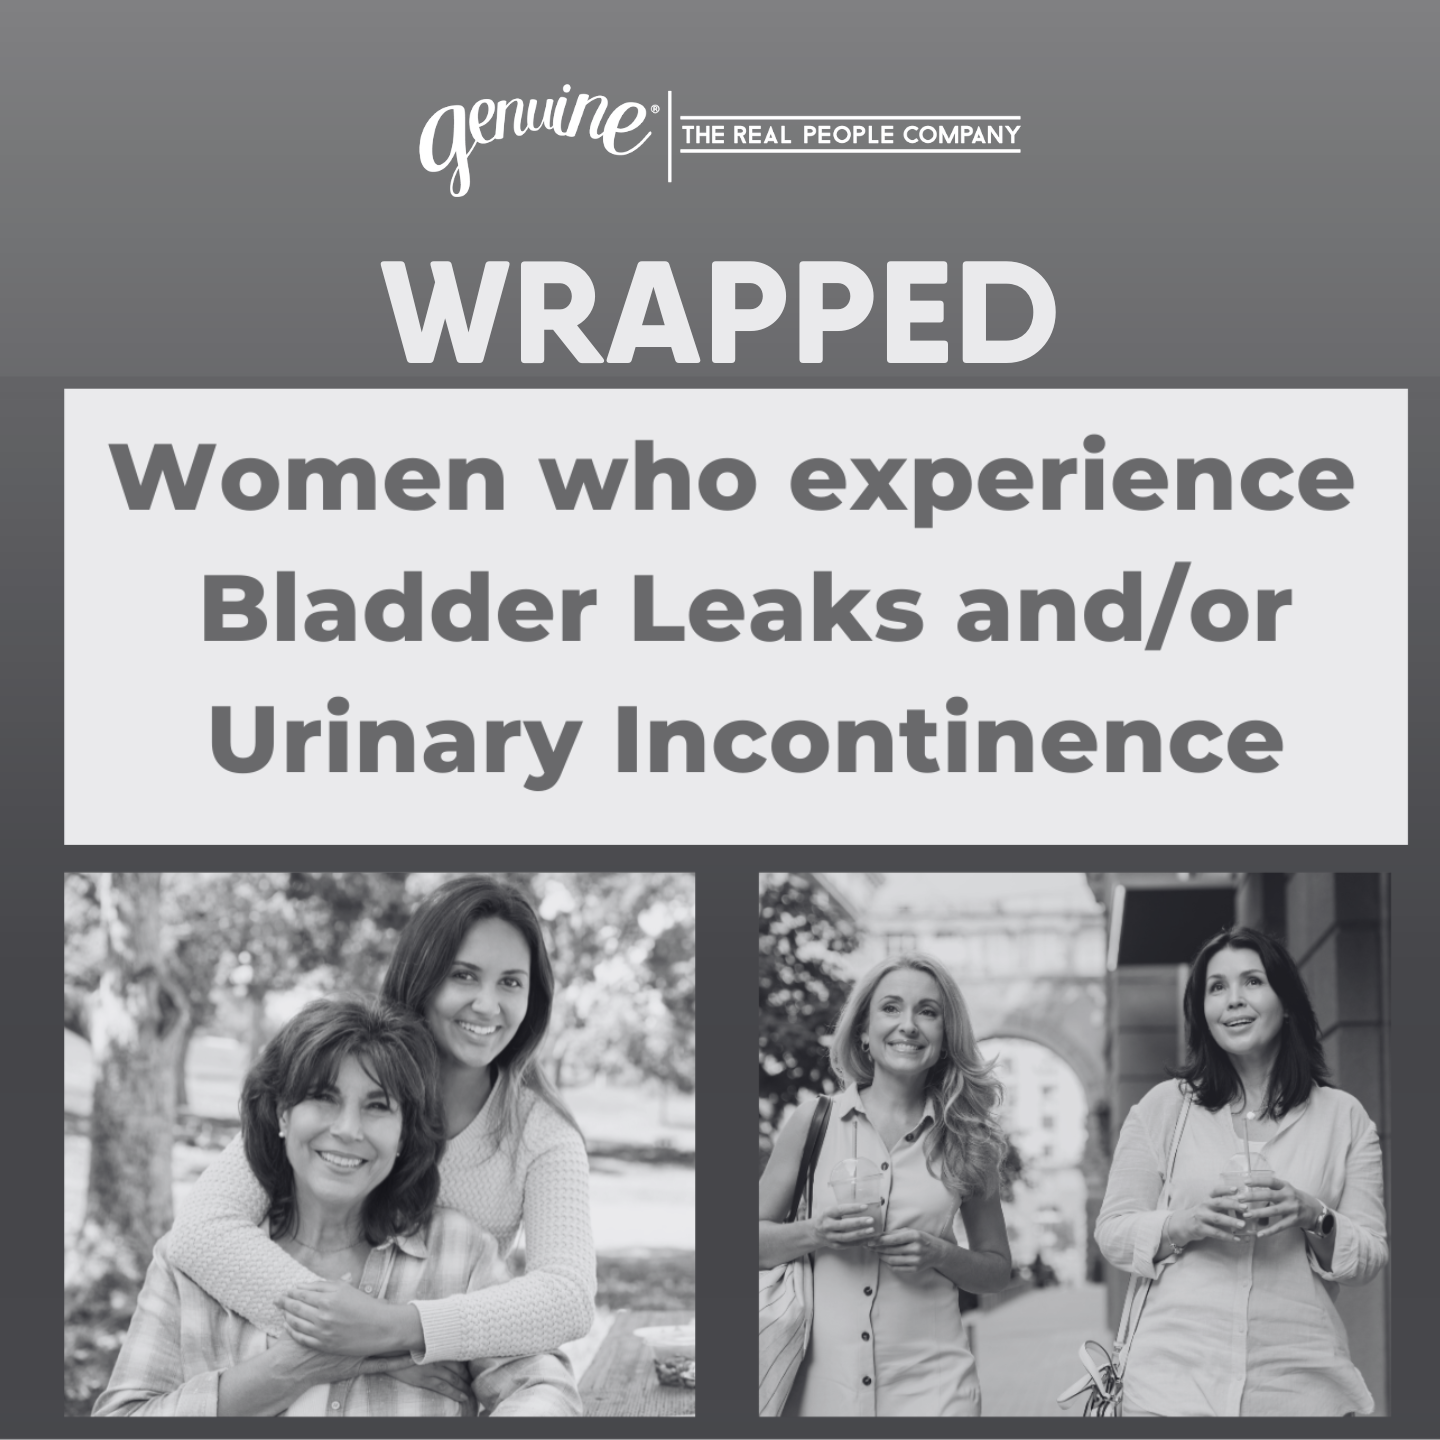 CASTING: WOMEN WHO EXPERIENCE BLADDER LEAKS AND/OR URINARY INCONTINENCE